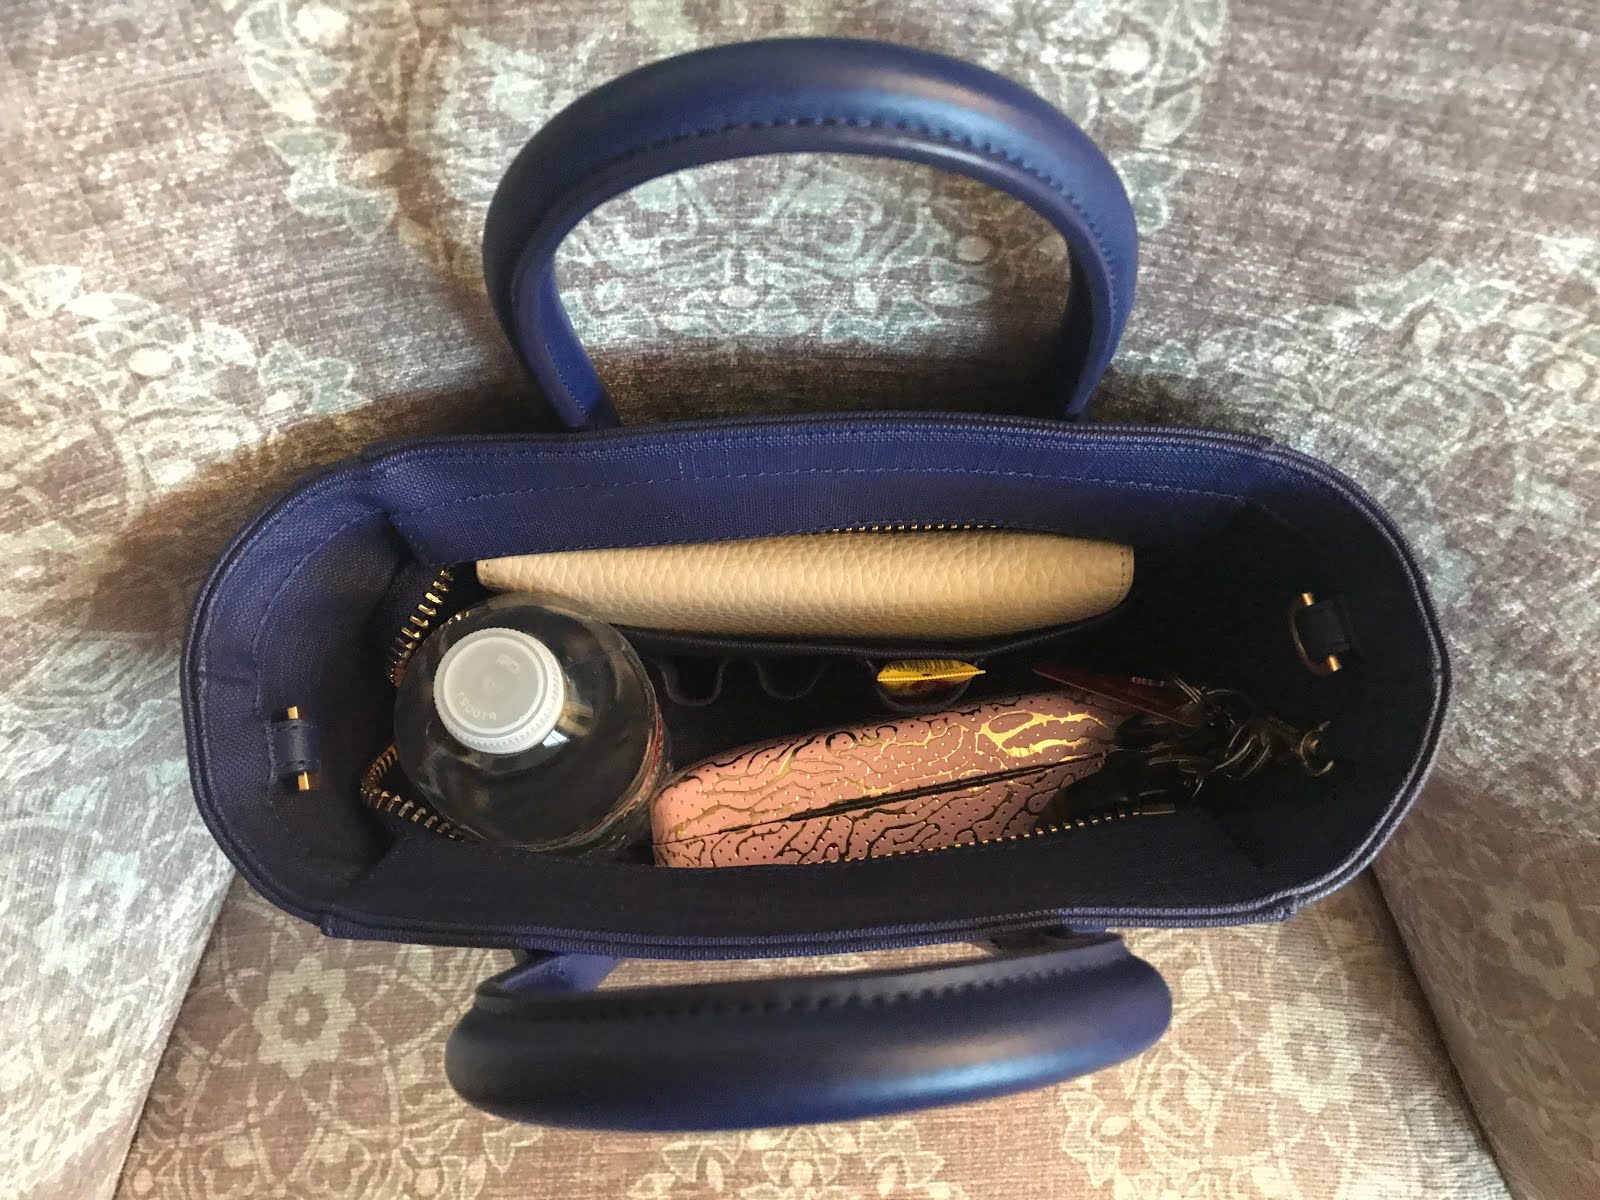 Dagne Dover Small Wade Diaper Bag Review & Comparison to other DD